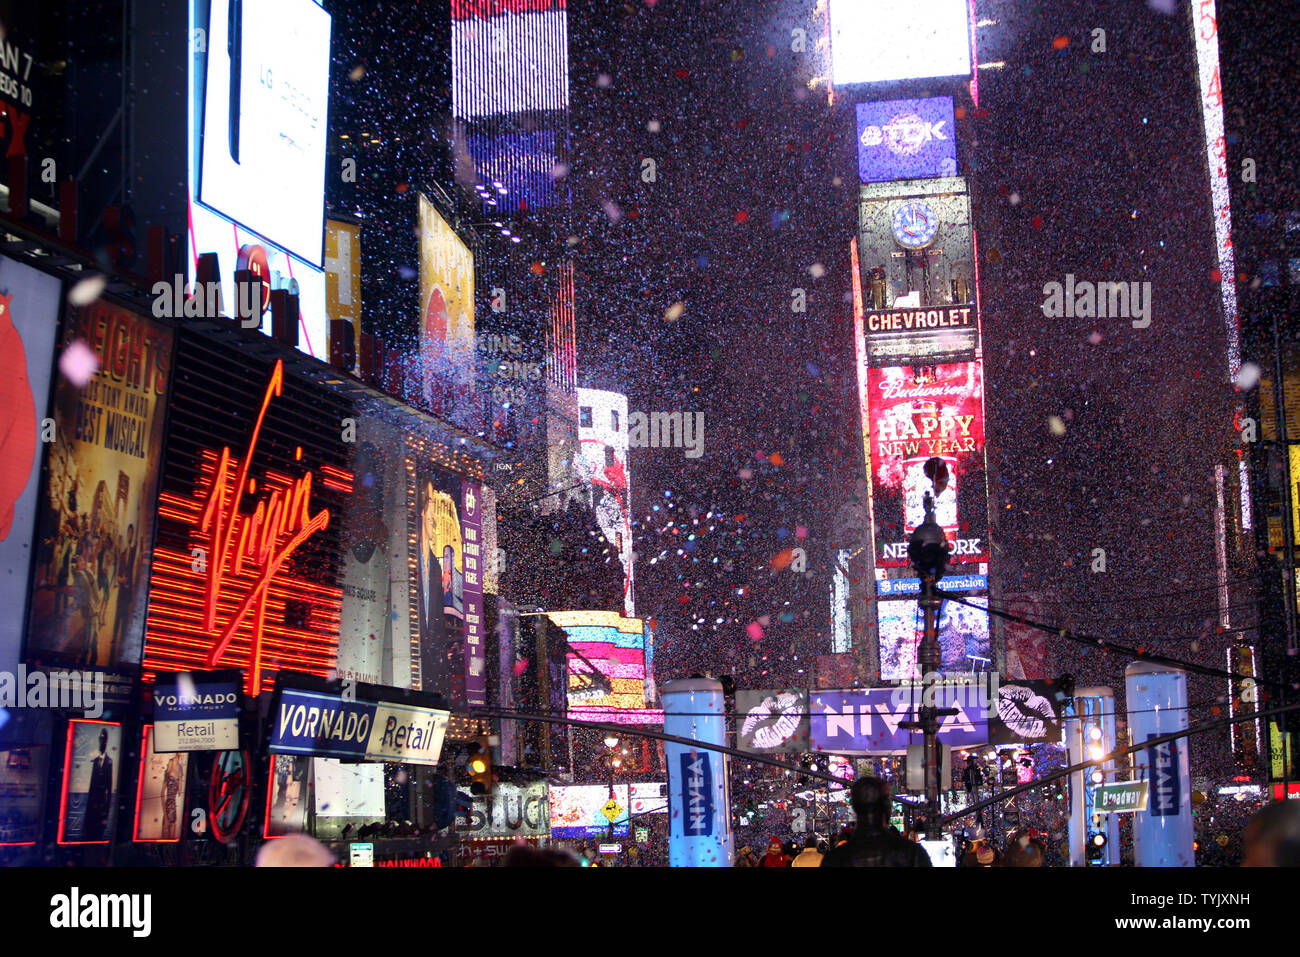 Confetti rains down on Times Square at the stroke of midnight during the New Year's Eve celebration on December 31, 2008 in New York City. (UPI Photo/Monika Graff) Stock Photo